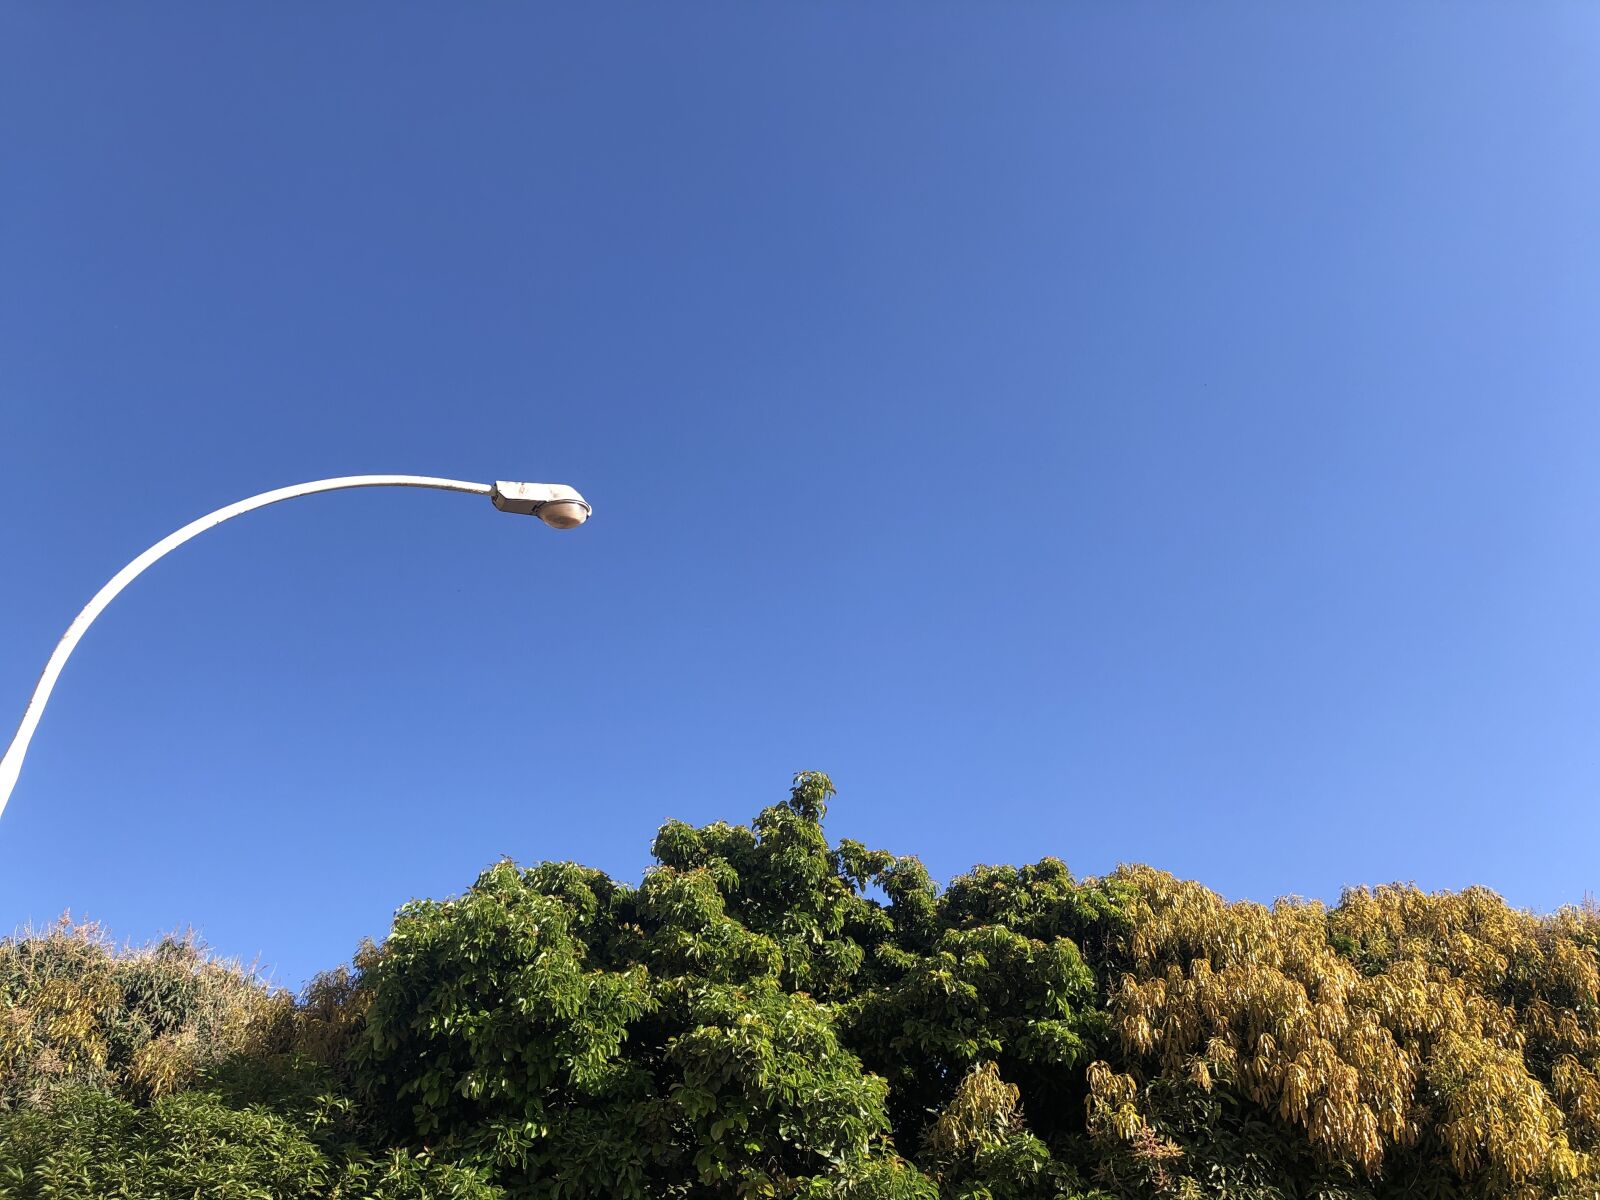 Apple iPhone X + iPhone X back dual camera 4mm f/1.8 sample photo. Sky, trees, post photography